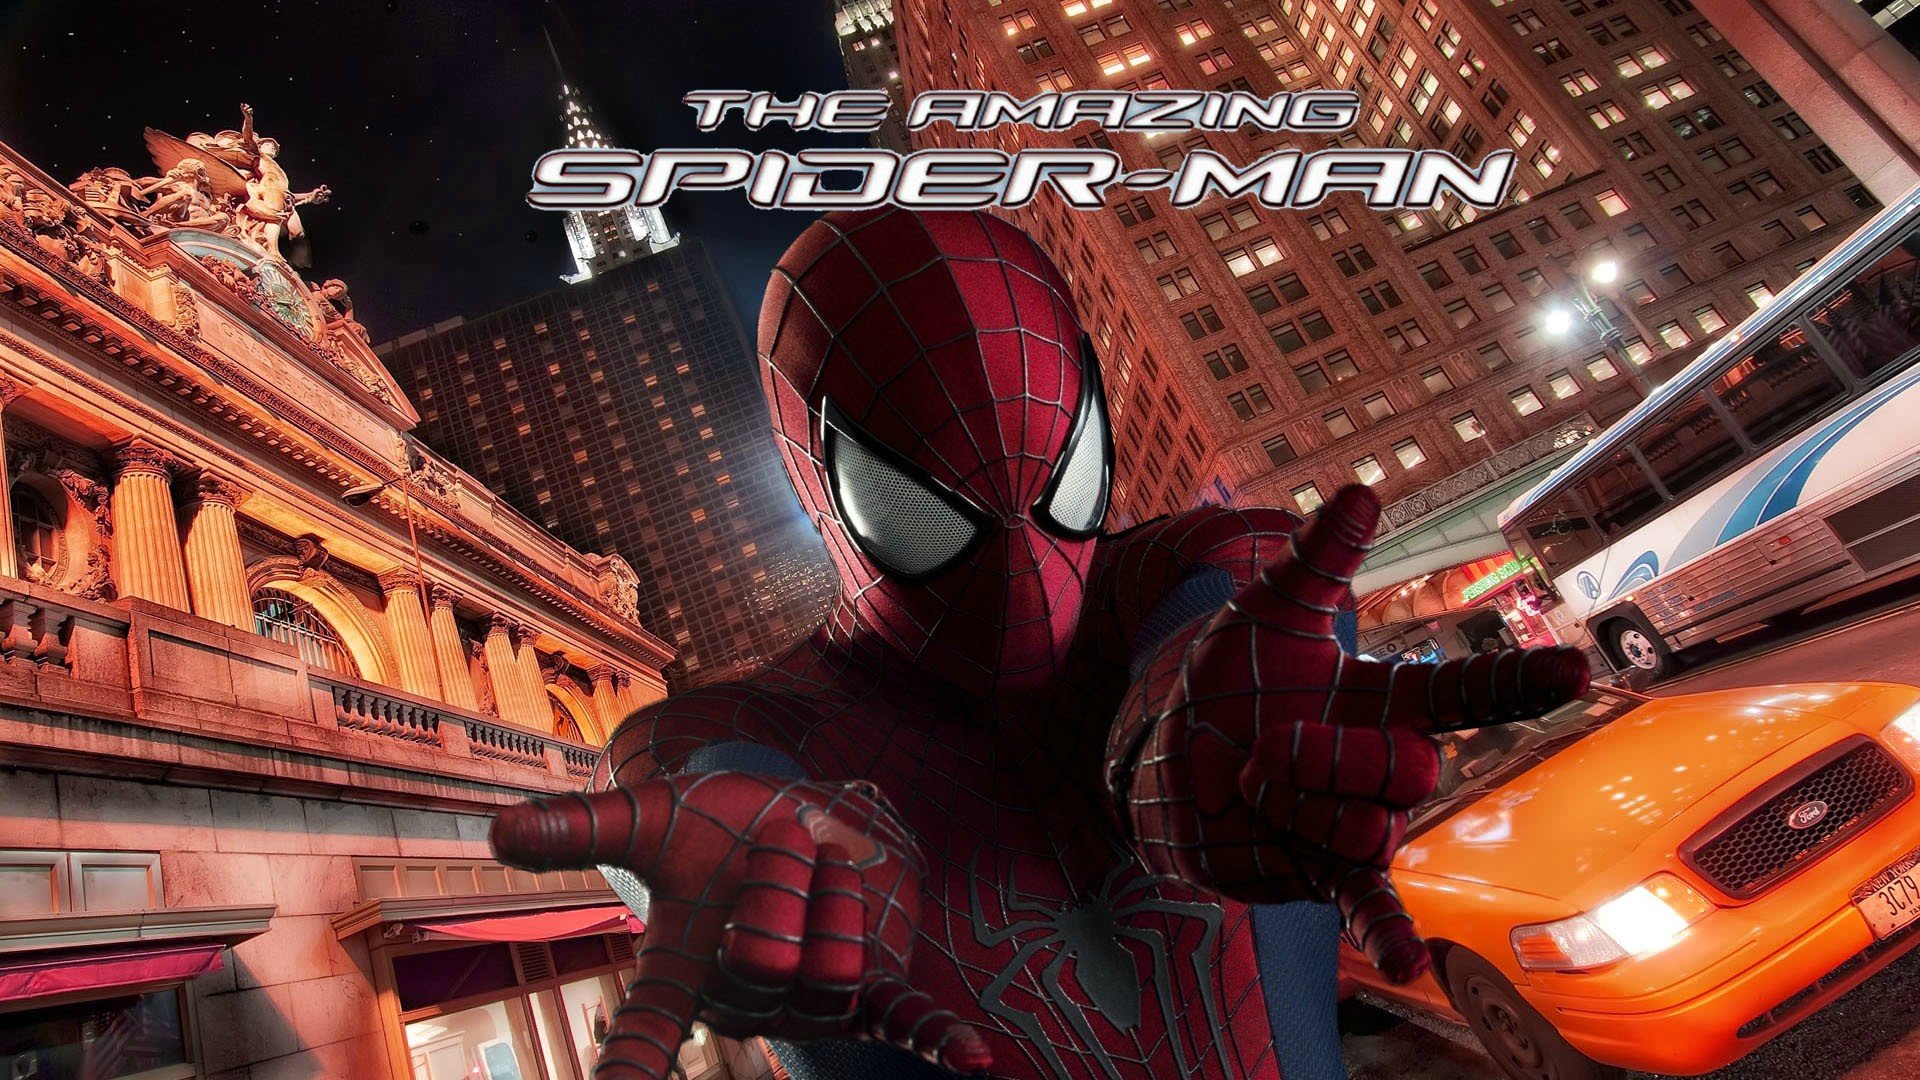 Download full hd 1080p The Amazing Spider-Man PC background ID:142088 for free